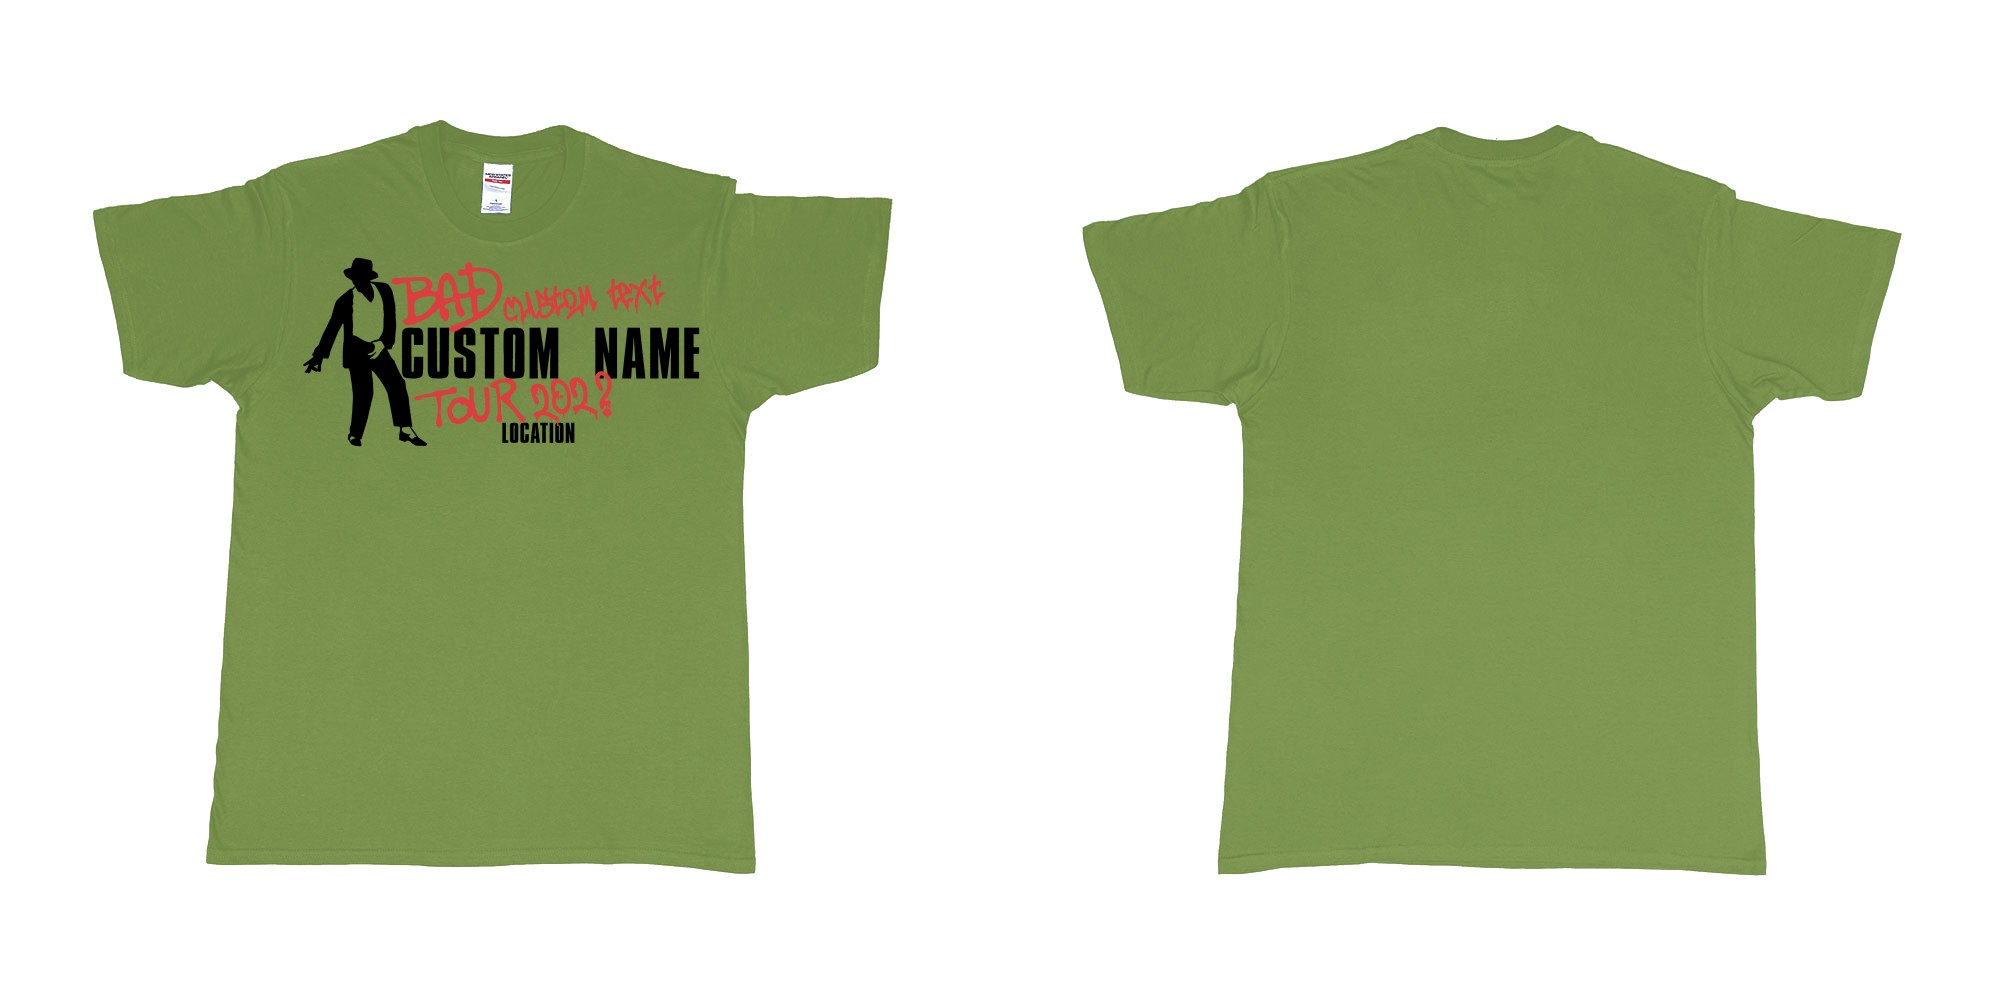 Custom tshirt design michael jackson bad tour custom name year location in fabric color military-green choice your own text made in Bali by The Pirate Way